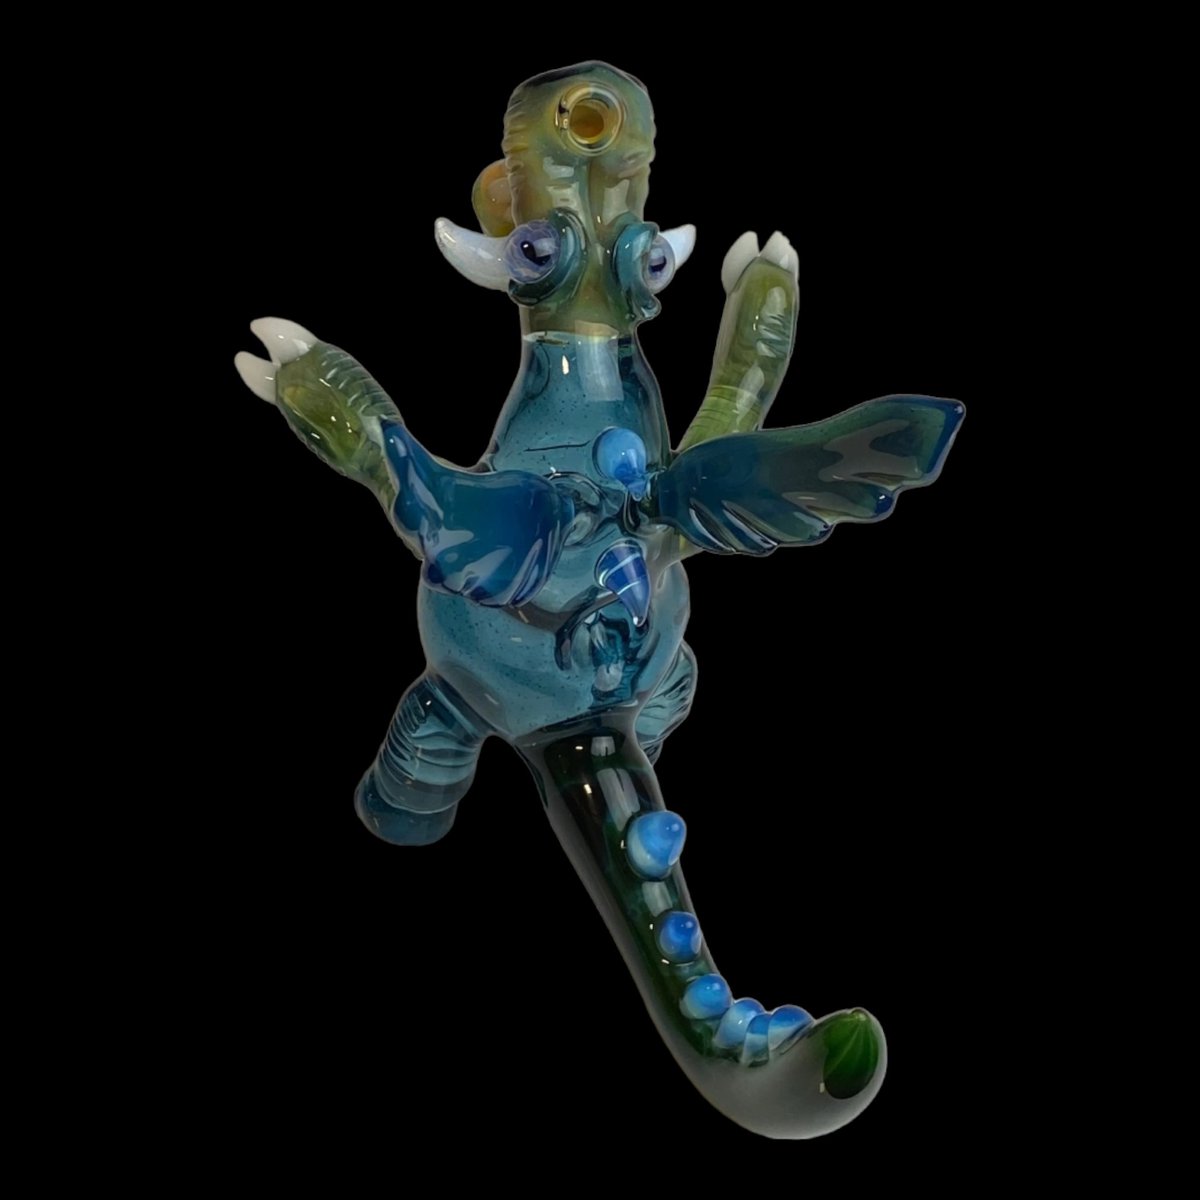 NEW Blue Stardust Dragon Dry Pipe by Roy, Washington Artist Organic Glassworks!!

Now on Display and Available at The Hippie House Glass Gallery!

#YearOfTheDragon #dragon #glassdragon #glassart #hippiehouse #organicglassworks #pnwmade #headyglass #pipe #weedpipe #functionalart